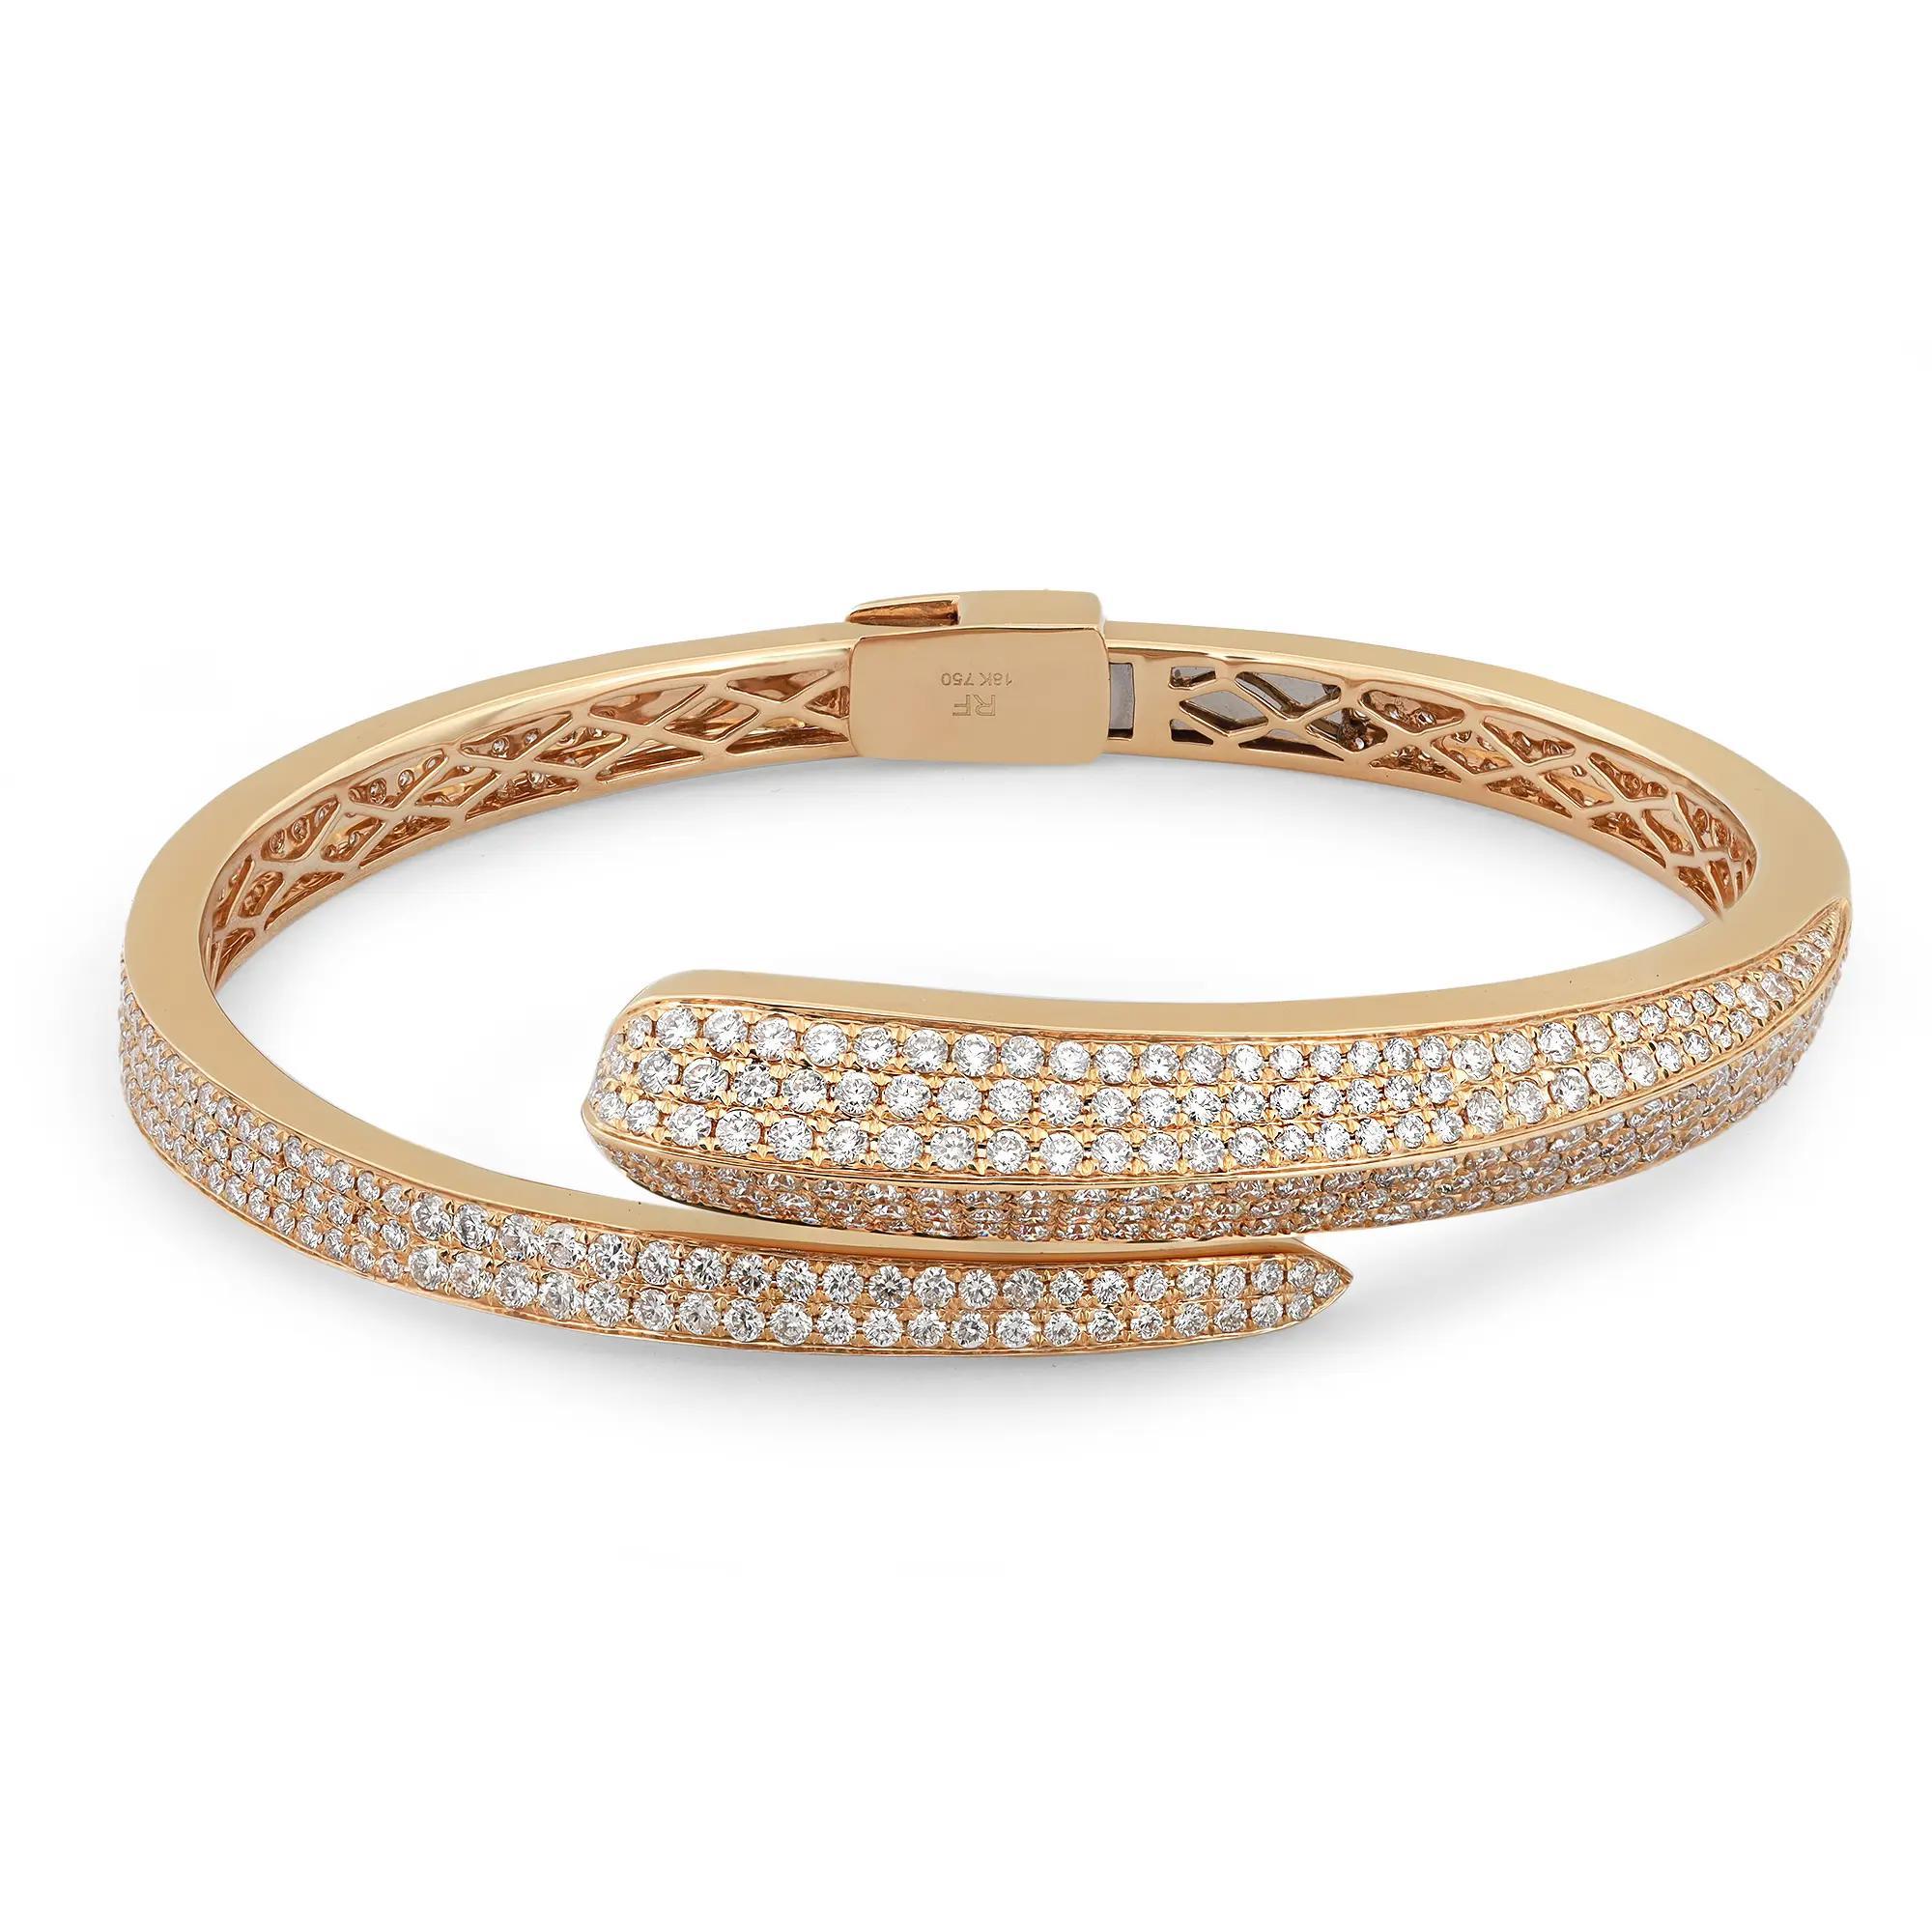 Let your style shine with this fancy and elegant diamond spiral bangle bracelet. It features pave set round brilliant cut diamonds weighing 4.31 carats. Crafted in high polished 18K yellow gold. Diamond Quality: G-H color and VS-SI clarity. The